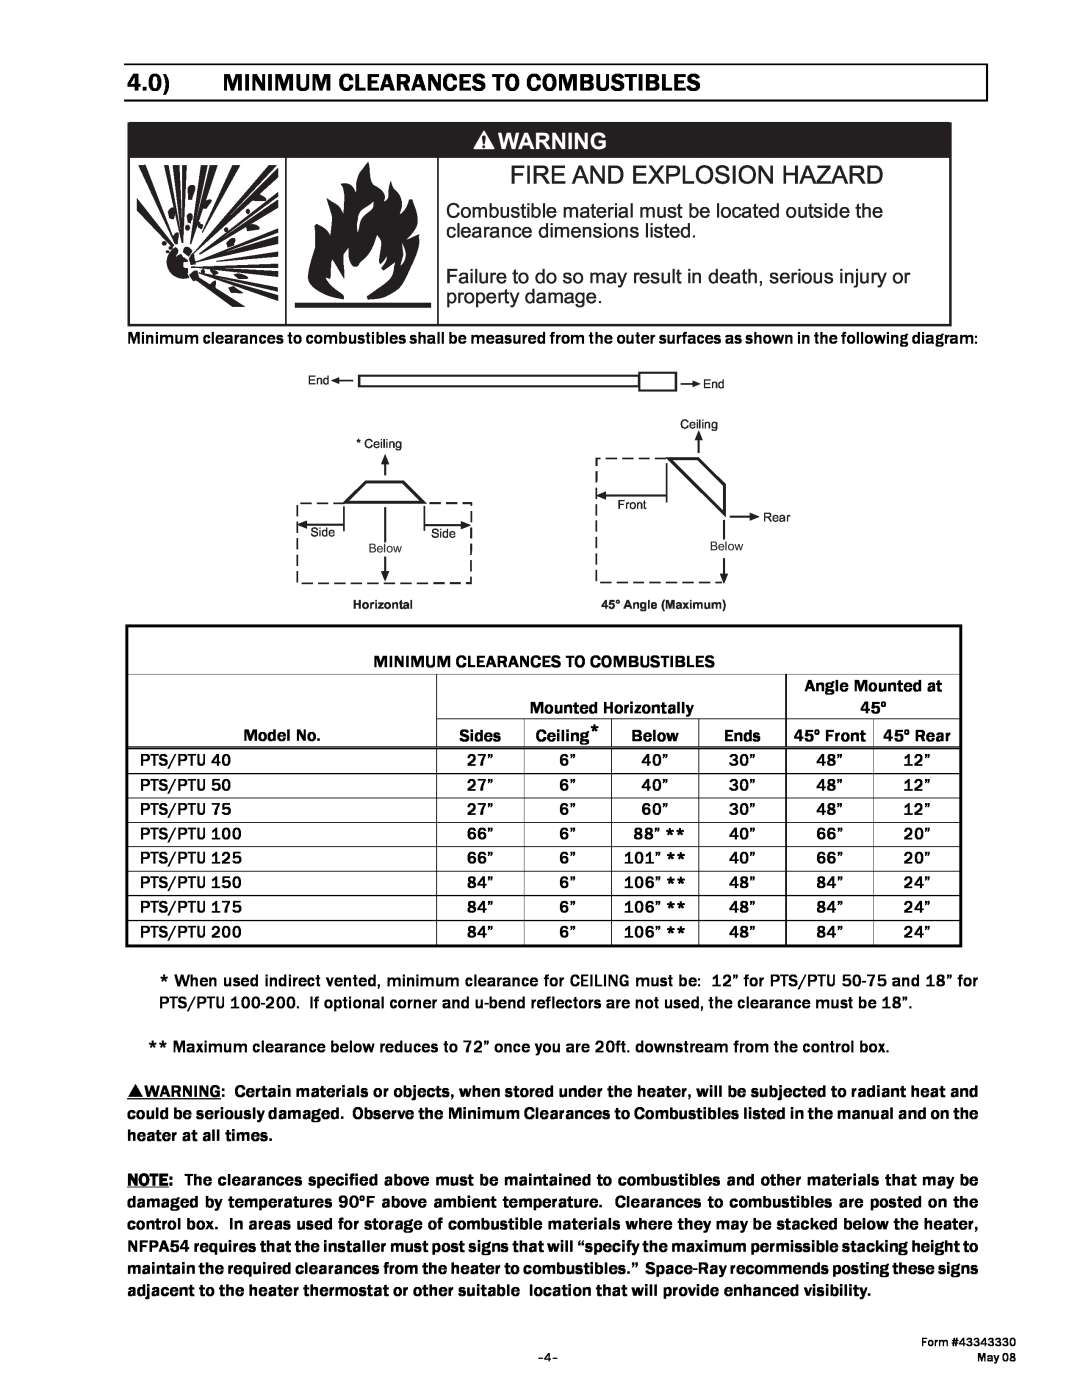 Gas-Fired Products PTU Series, PTS Series manual Minimum Clearances To Combustibles 